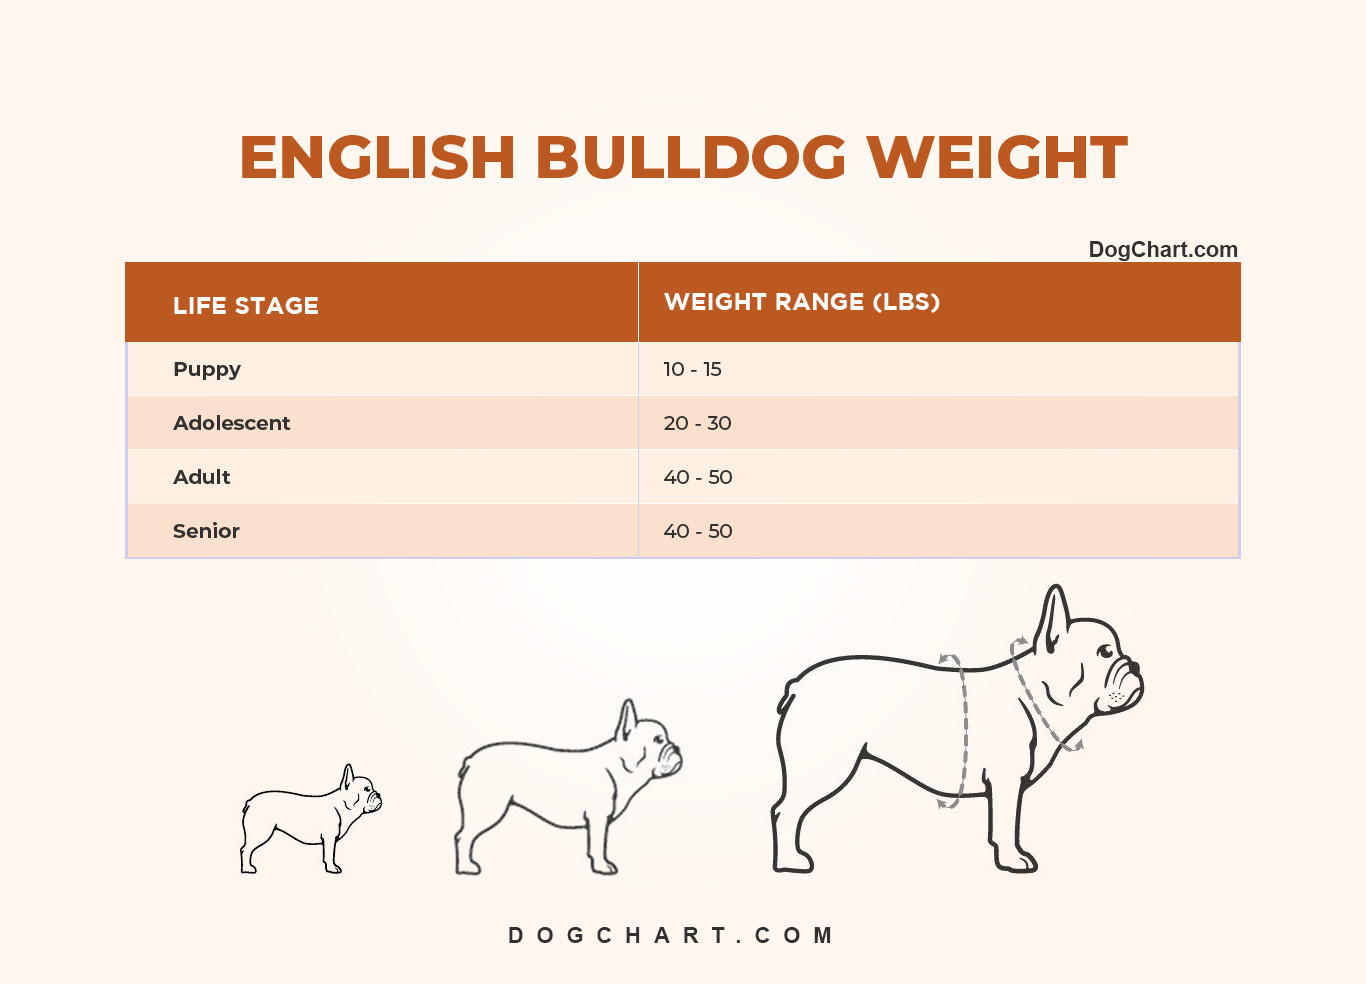 English Bulldog Weight Chart in KG, lbs by Life Stages